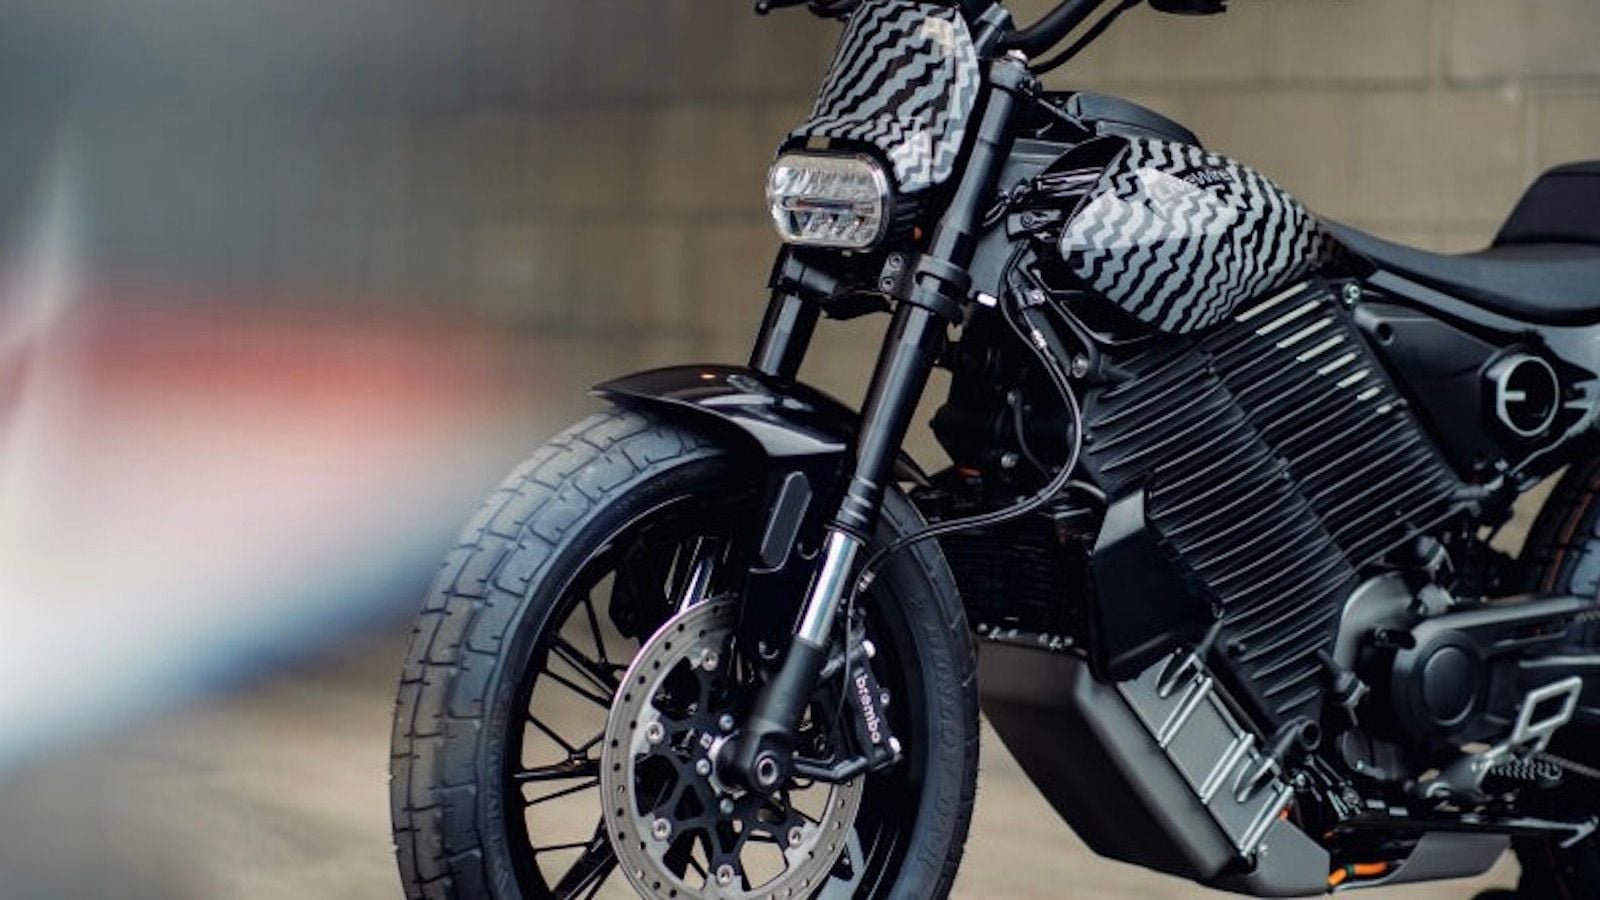 Harley-Davidson might have two all-new bikes coming, leaked documents  suggest - CNET